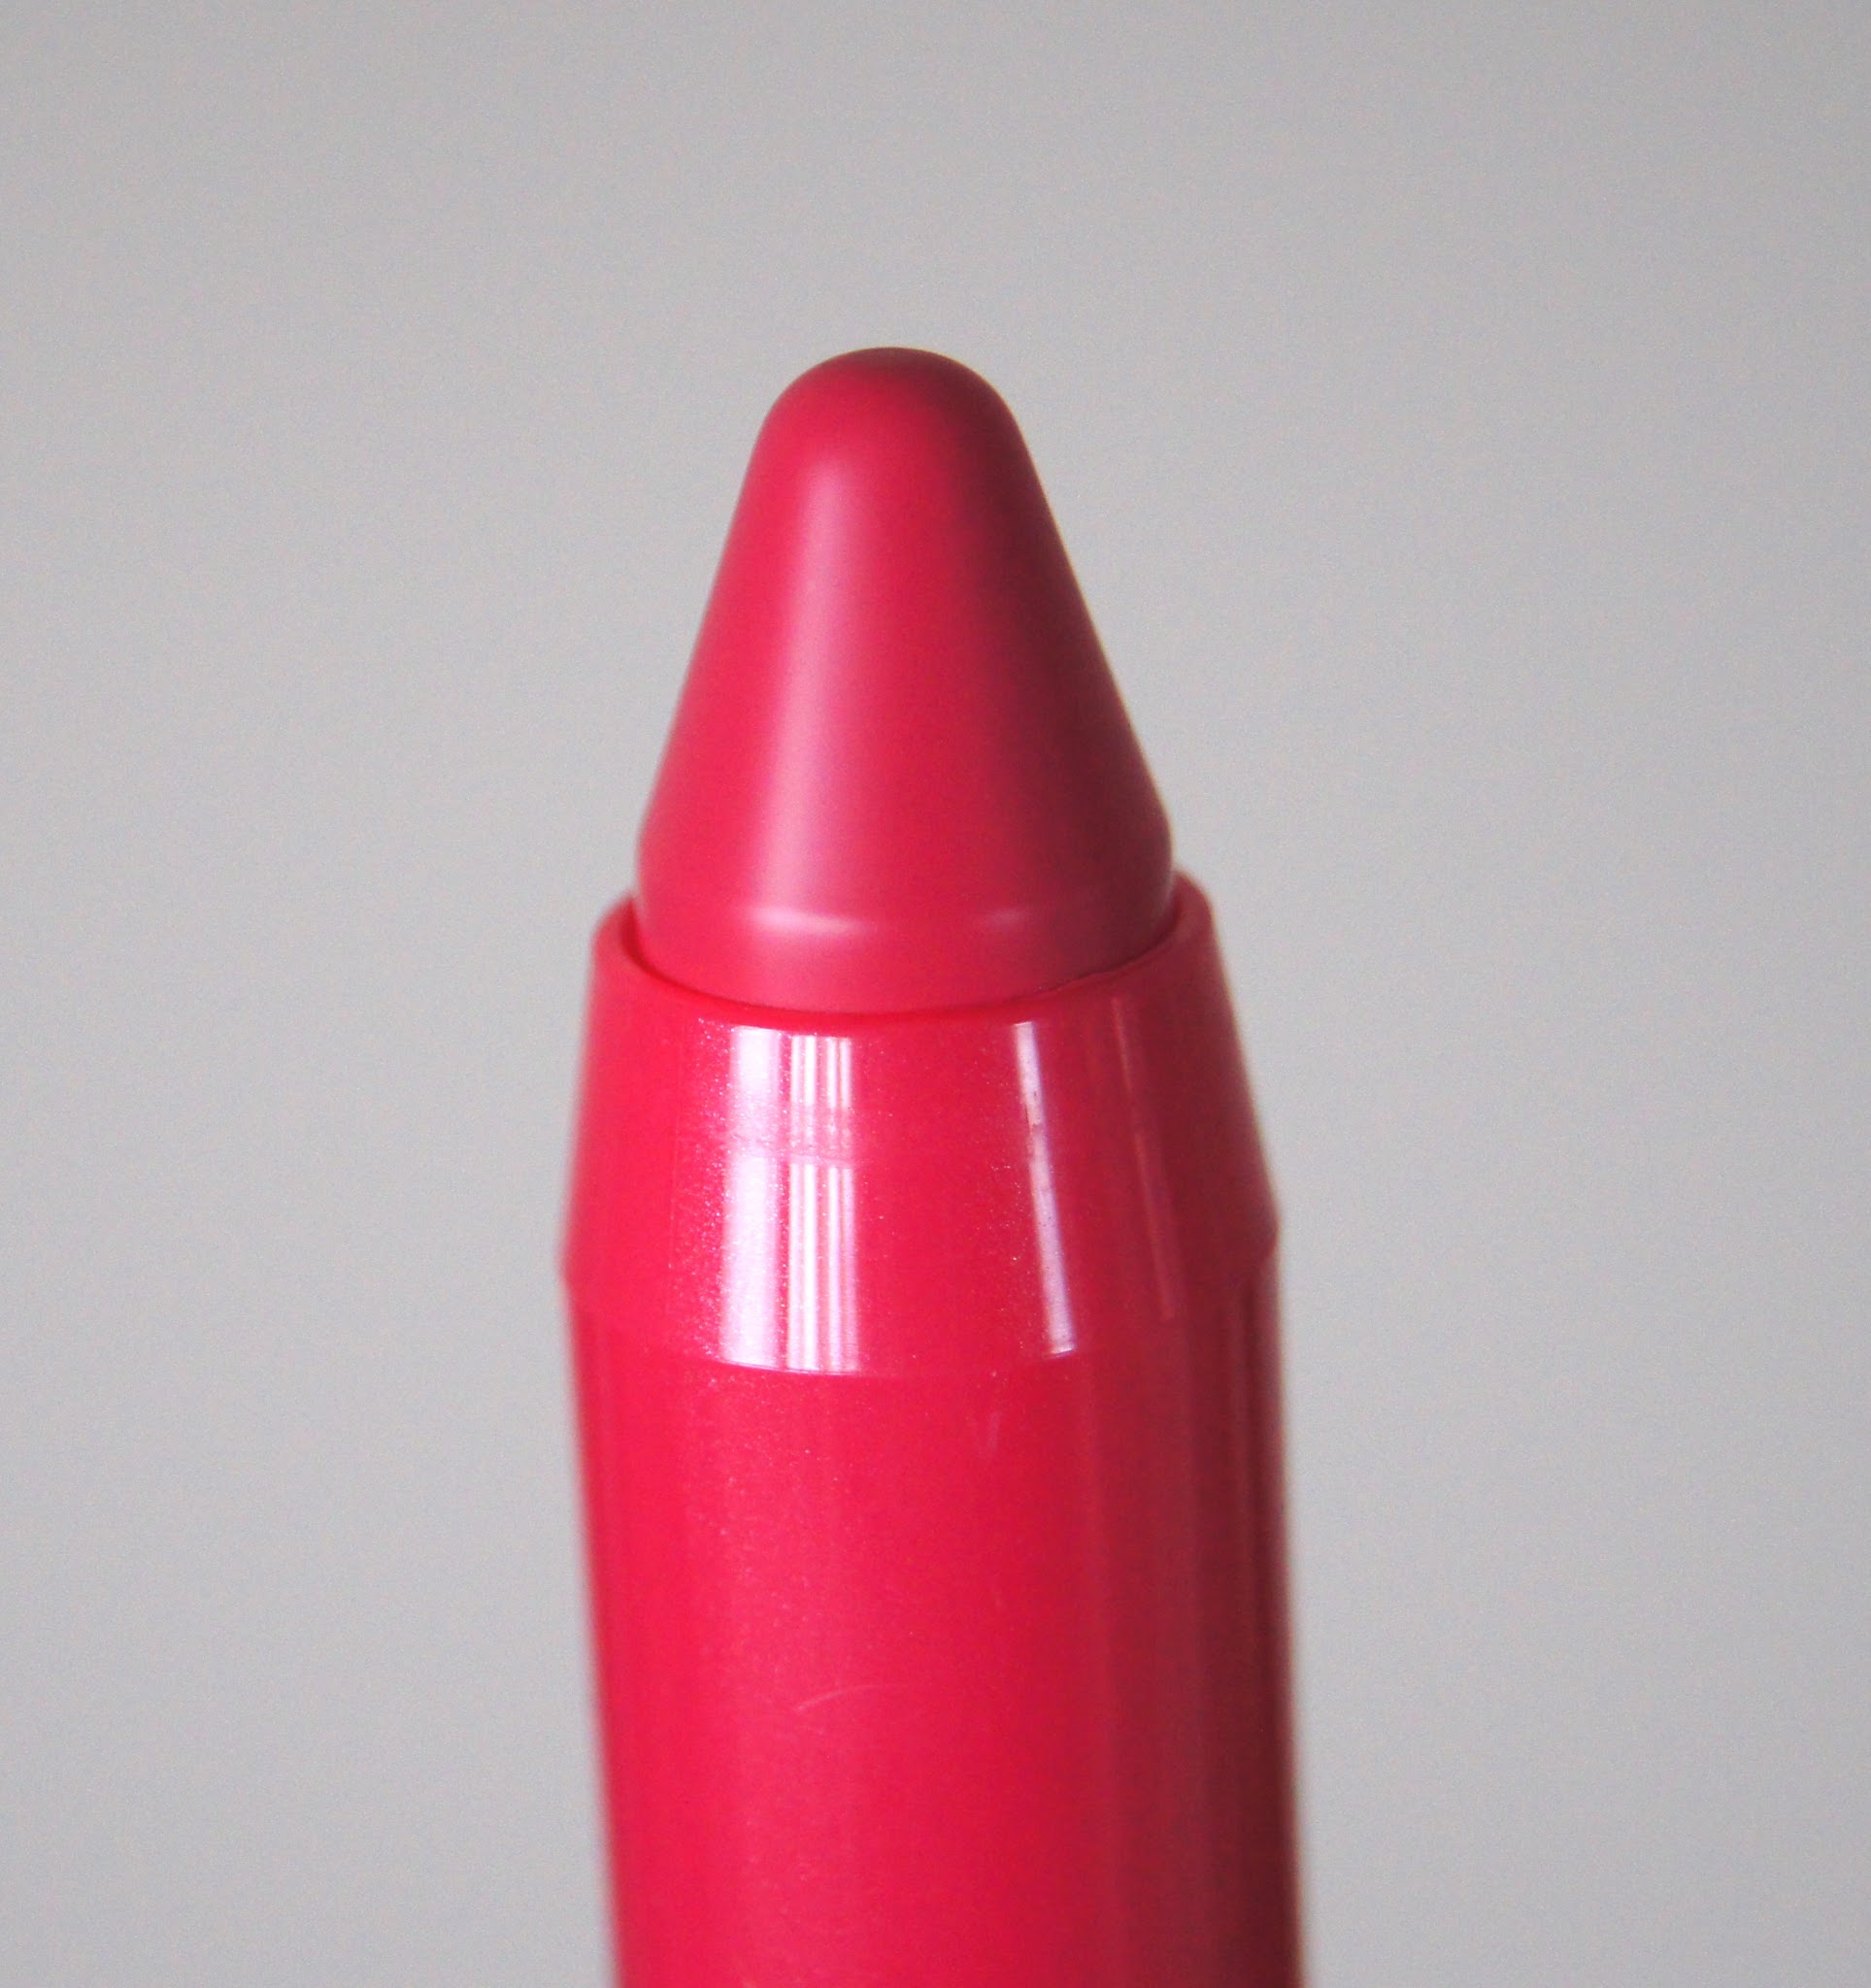 bourjois color boost glossy finish lipstick 02 fuchsia libre review swatch